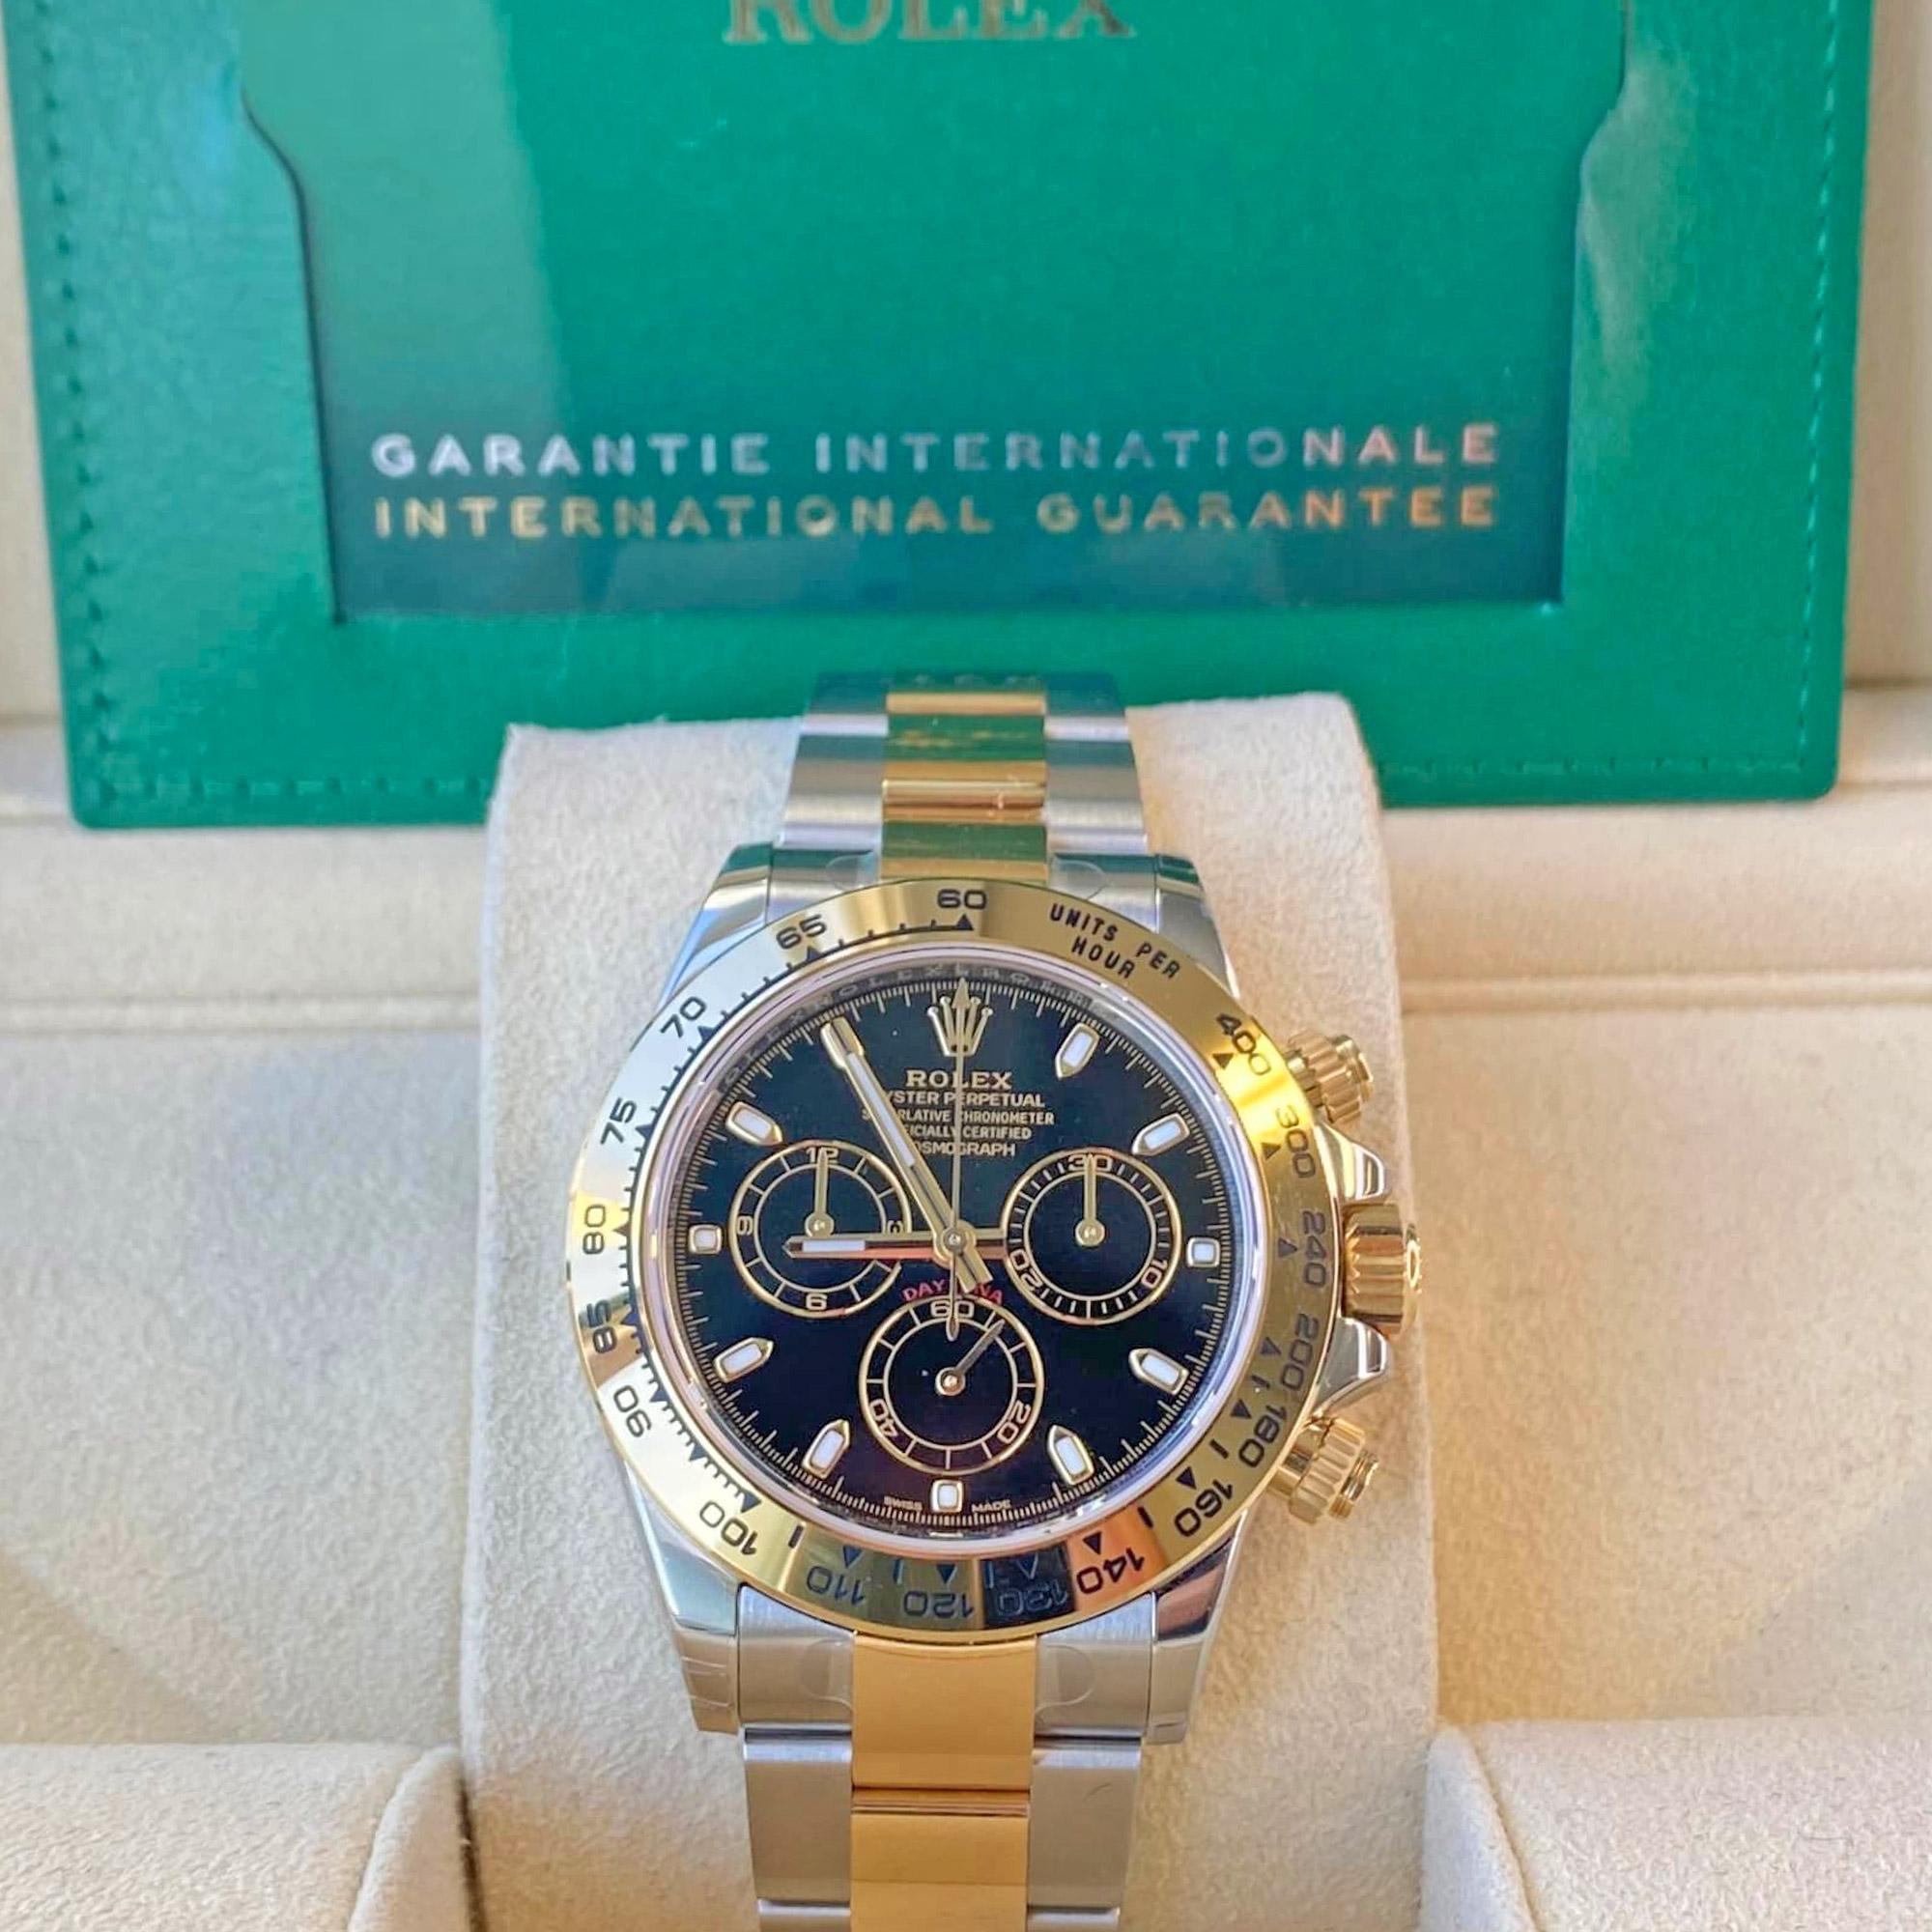 Unworn Professional watch Rolex Cosmograph Daytona 40 mm, Oystersteel and yellow gold, Ref# 116503-0004 - luxury, elegance and practicality.

Make: Rolex
Model: Cosmograph Daytona
Reference: 116503-0004
Diameter: 40 mm
Case material: Yellow Rolesor